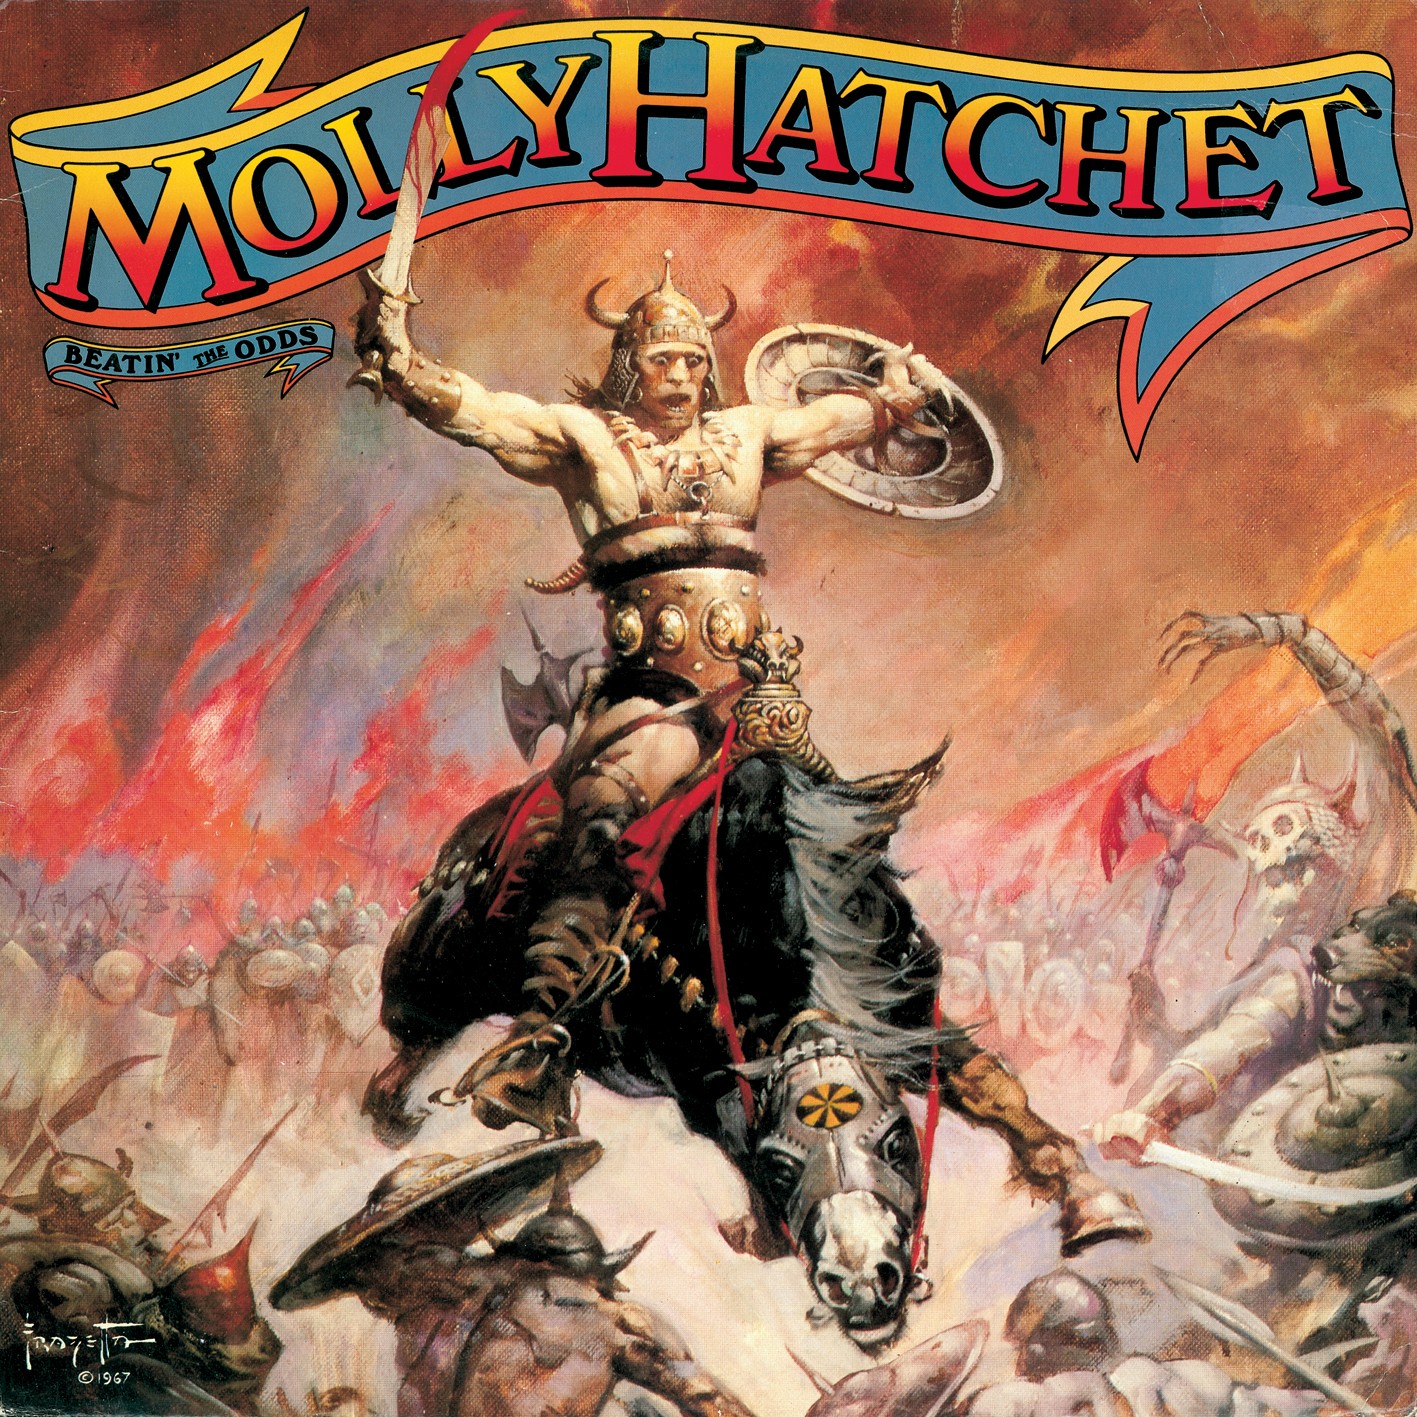 Download Latest HD Wallpaper of, Music, Molly Hatchet